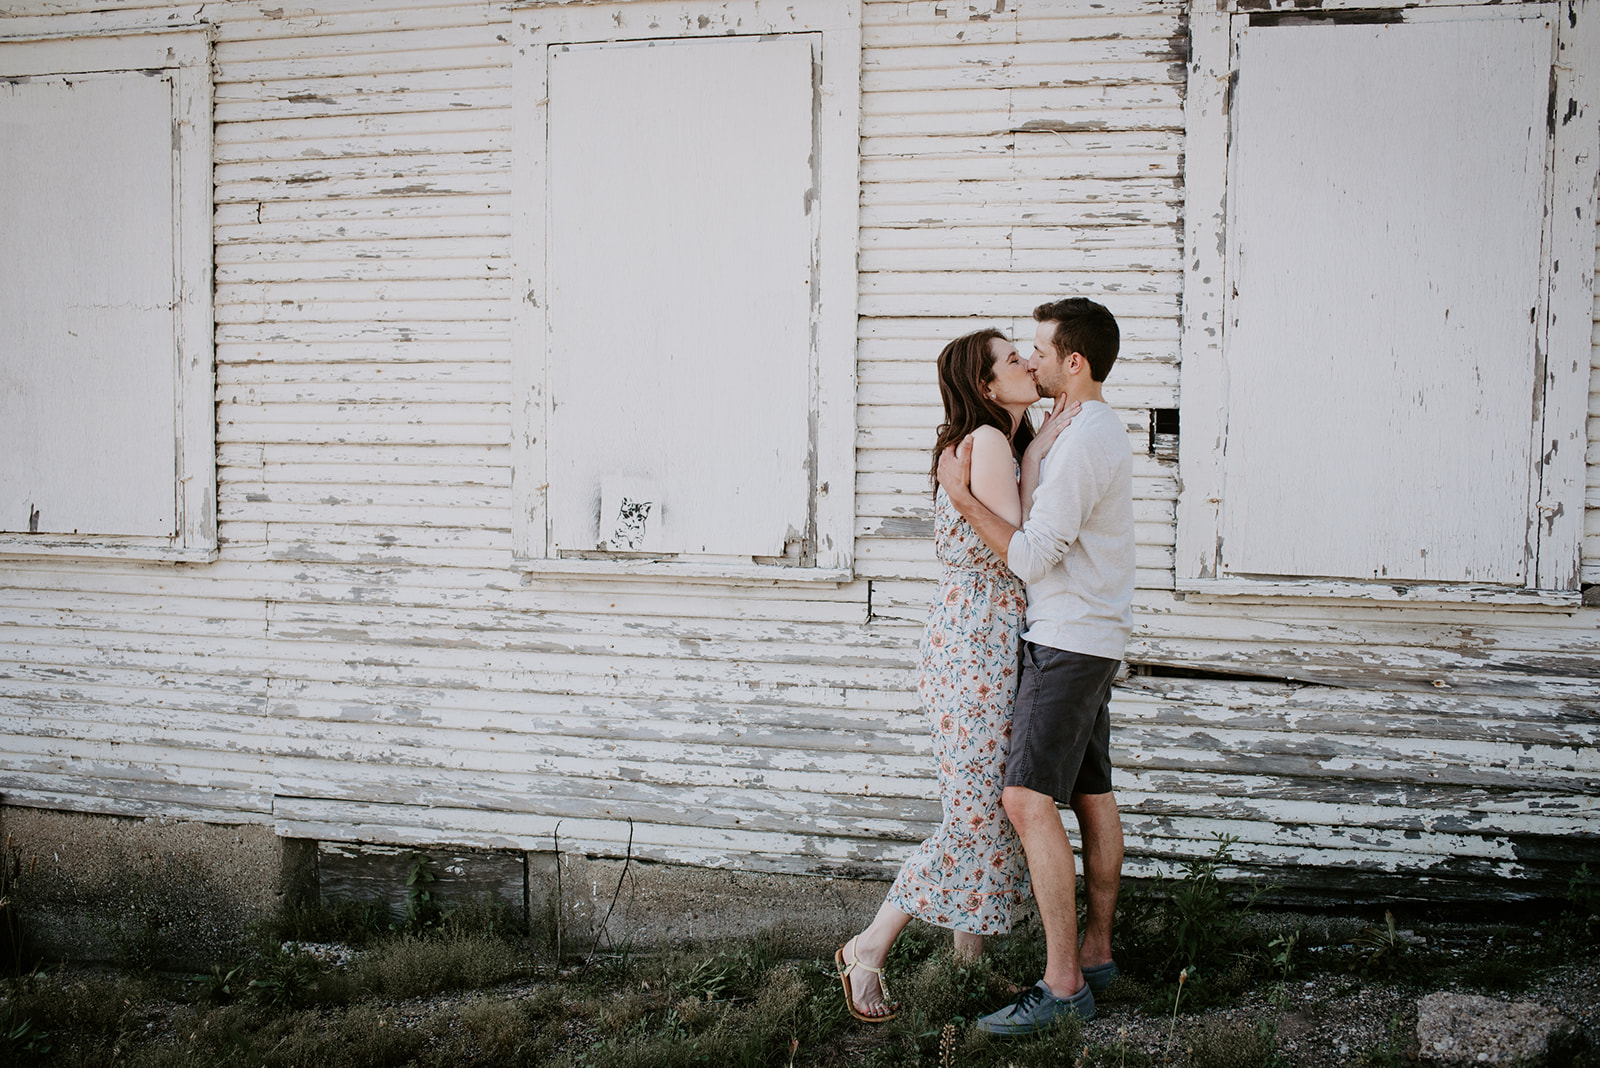 Grand Rapids engagement photography session downtown Grand Rapids Liv Lyszyk Photography Michigan Wedding Photographer